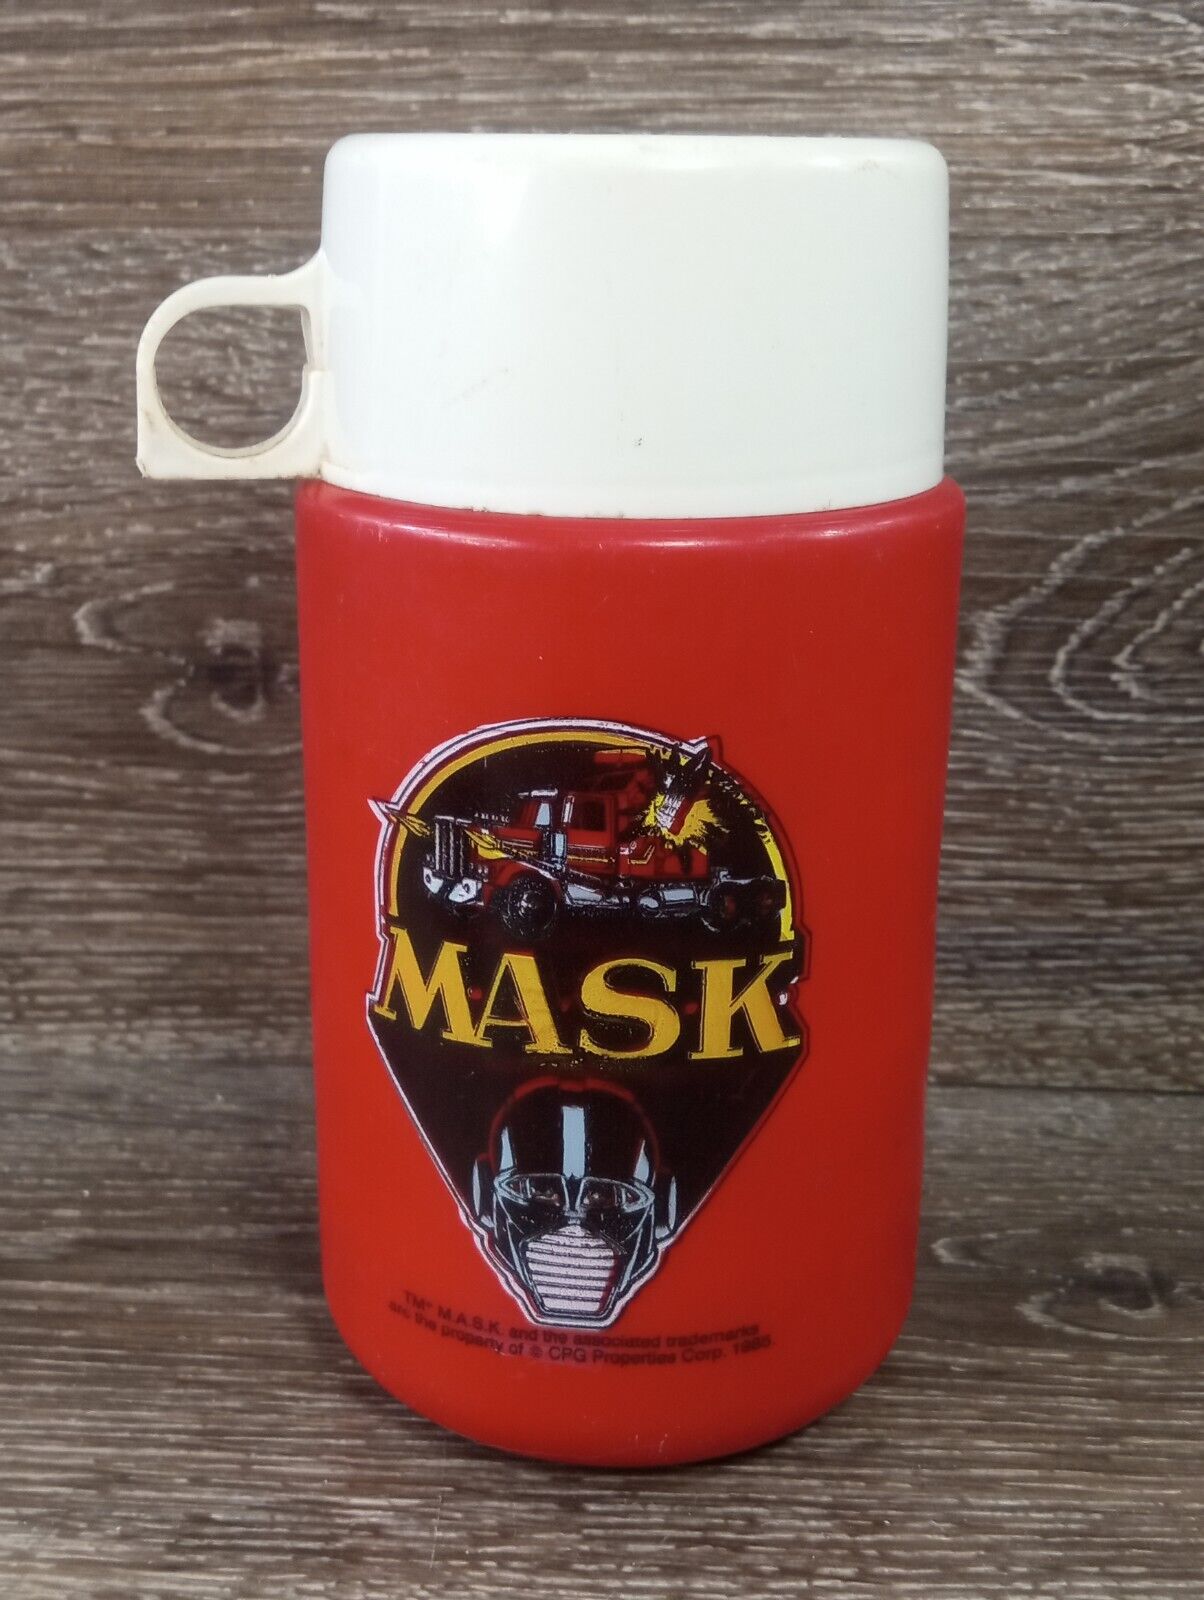 MASK M.A.S.K. Lunchbox  Replacement Thermos Red  Vintage 1985